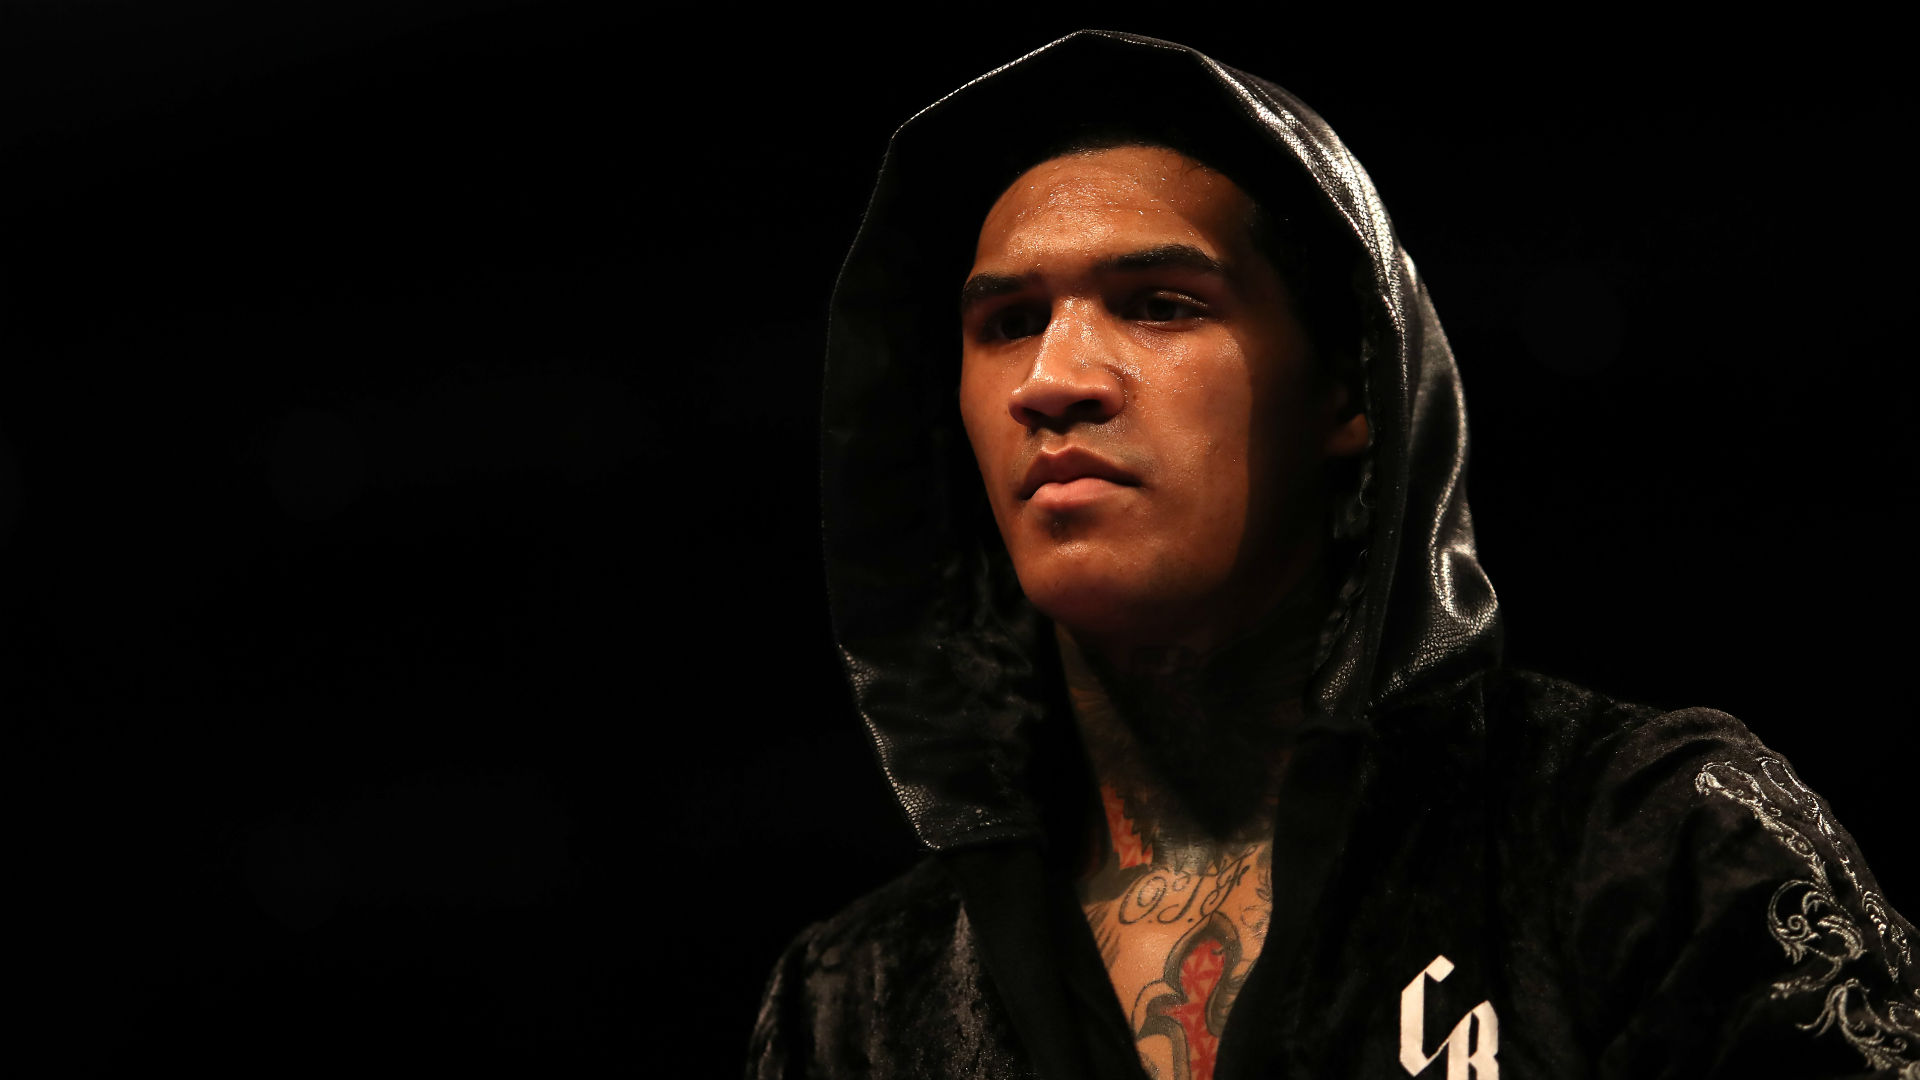 Top welterweight prospect Conor Benn set to make an impact in 2022